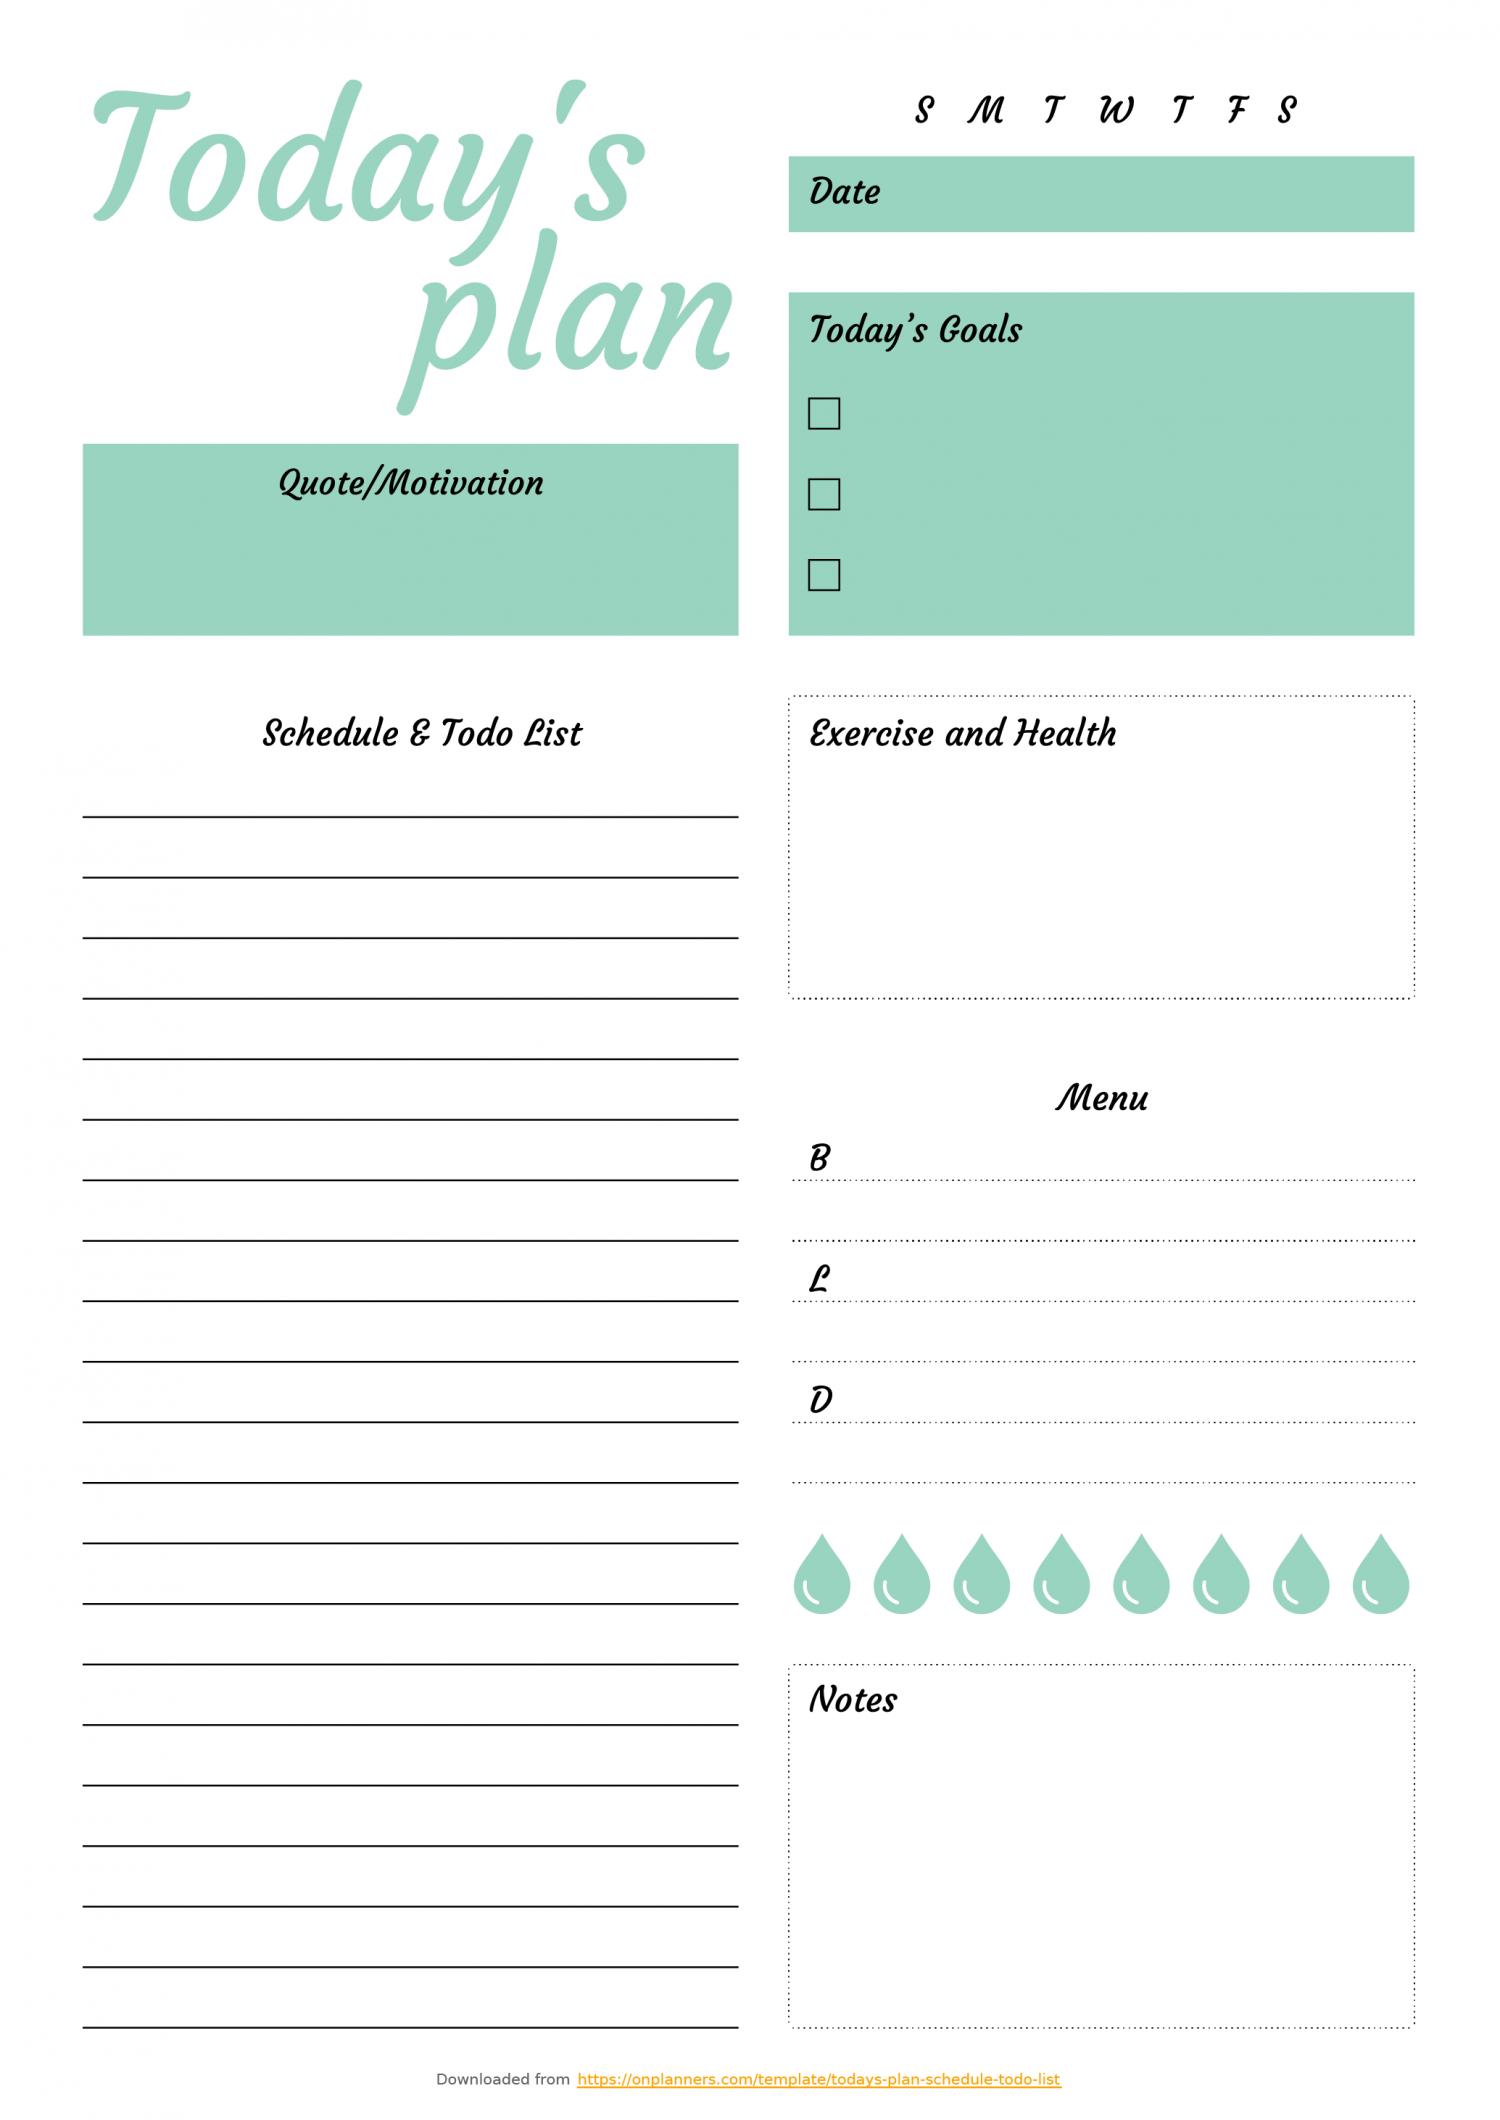 Free Printable Today s Plan With Schedule Todo List PDF Download